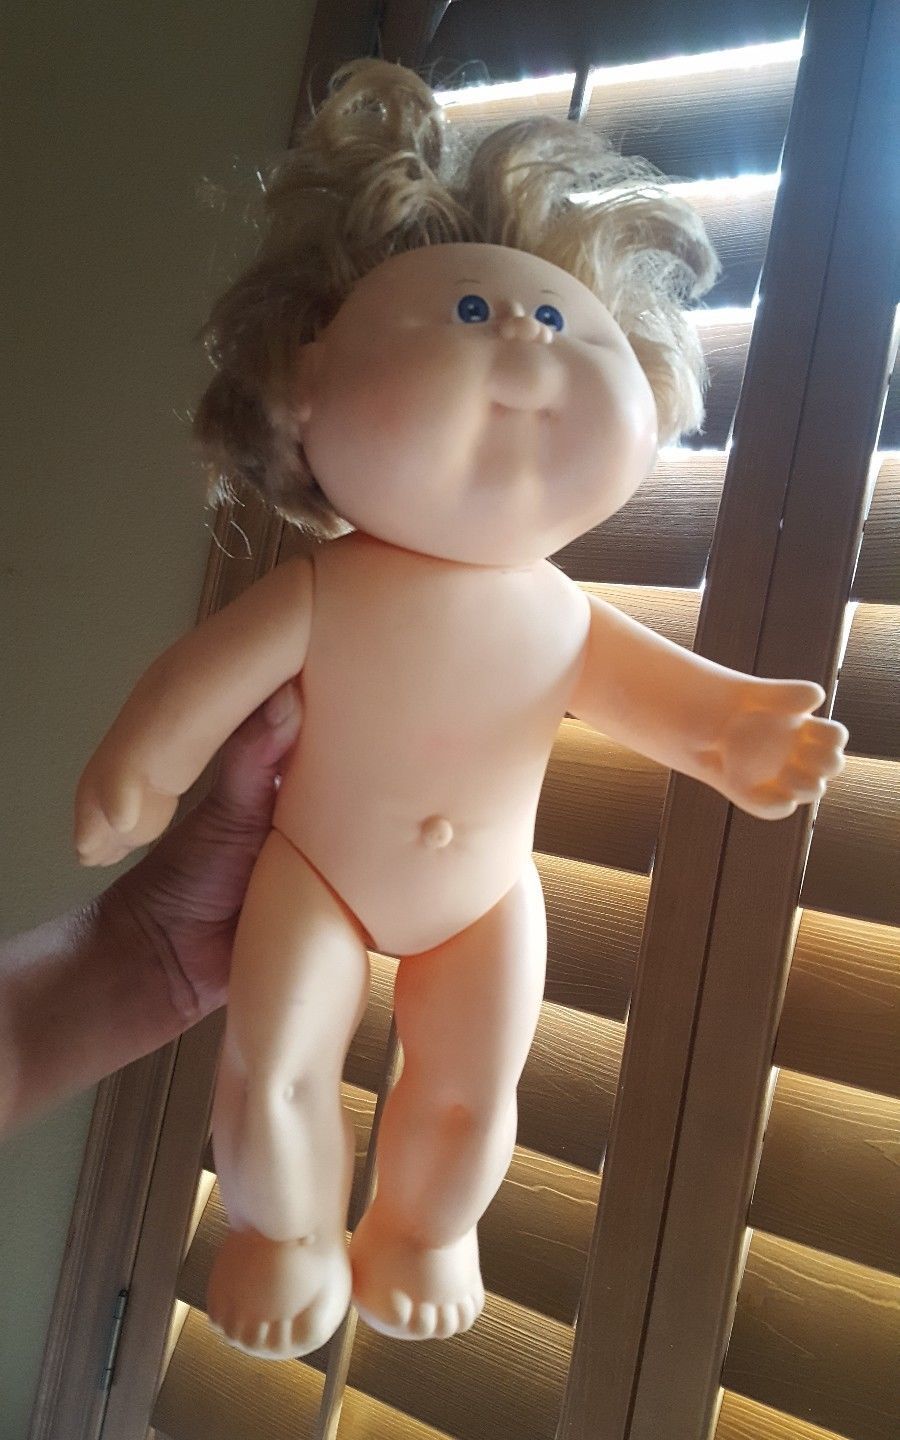 1987 cabbage patch doll